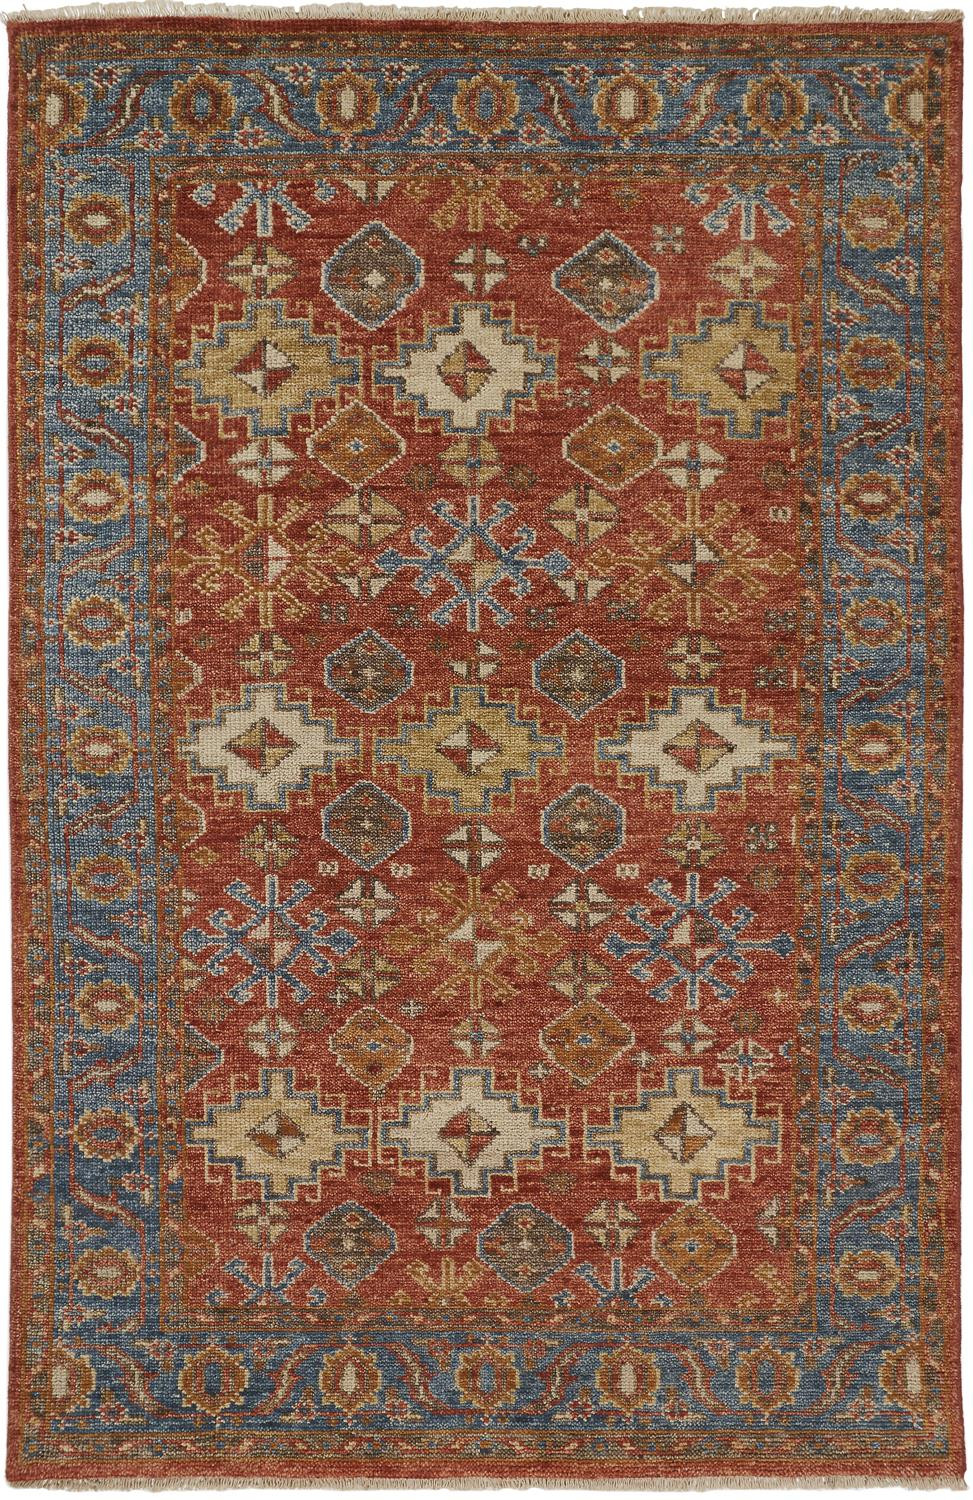 2' X 3' Red Blue And Orange Wool Floral Hand Knotted Stain Resistant Area Rug With Fringe-512635-1